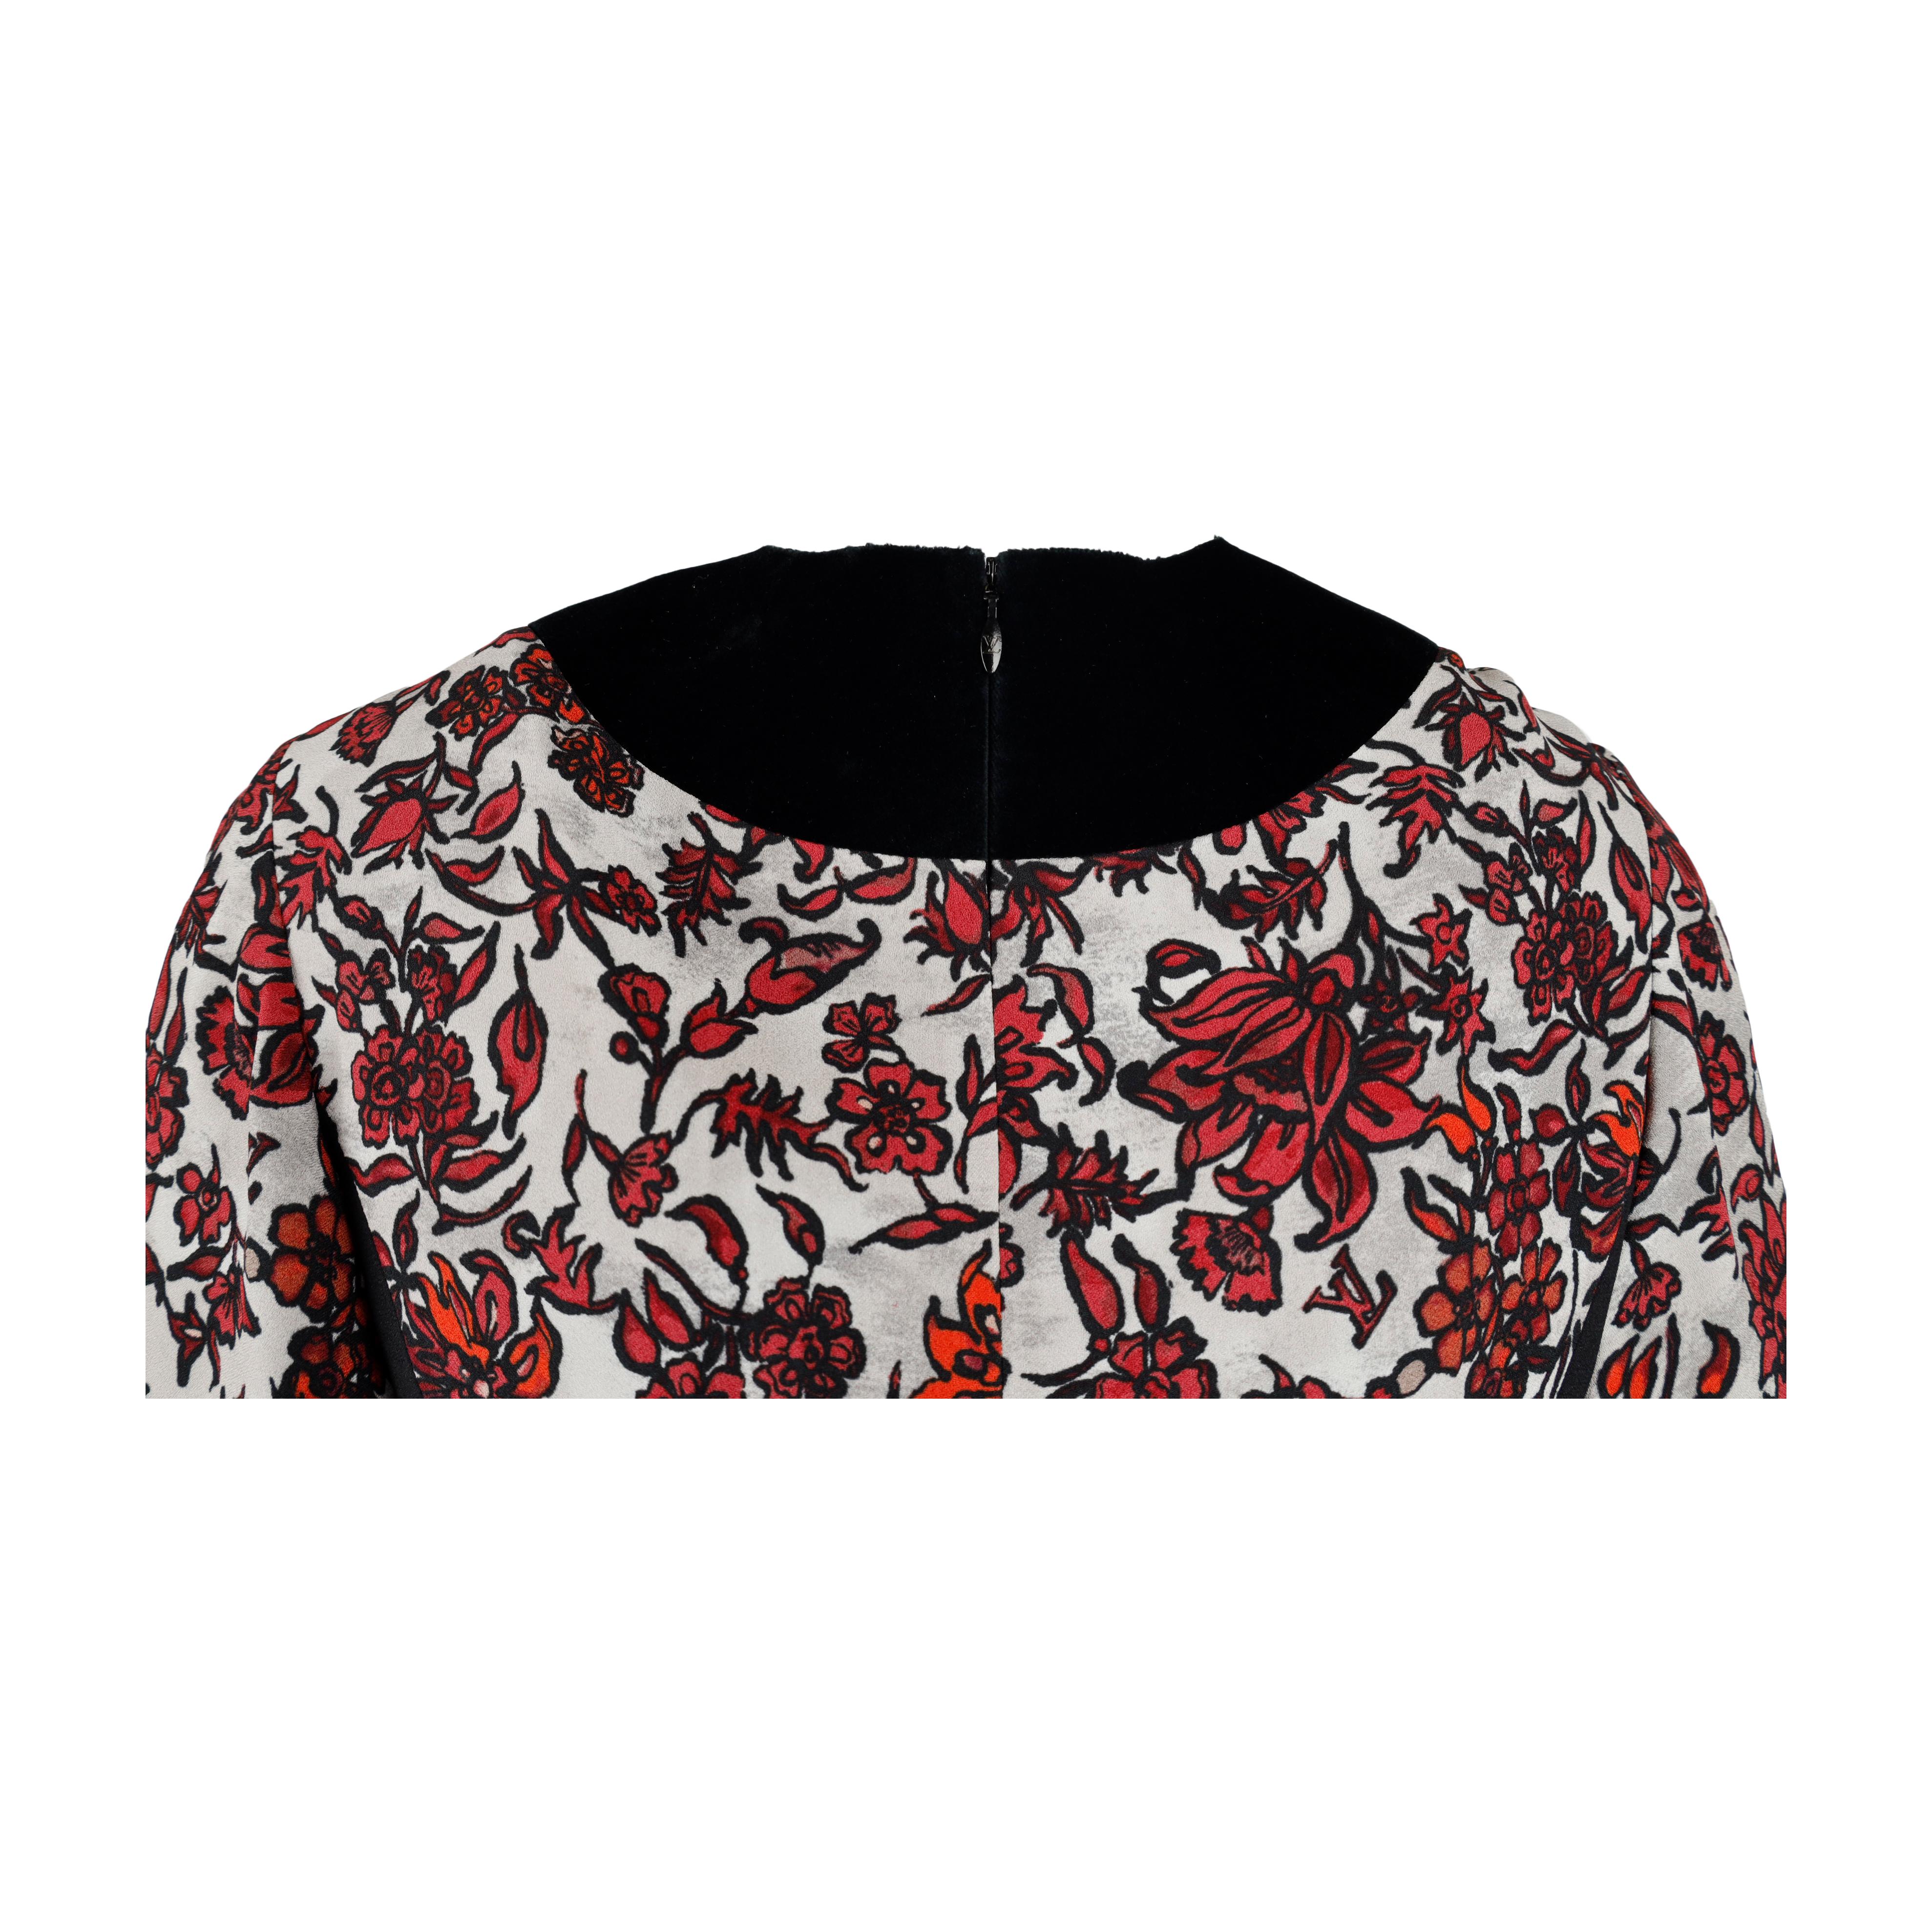 Louis Vuitton Red Black Floral Printed Dress For Sale 1